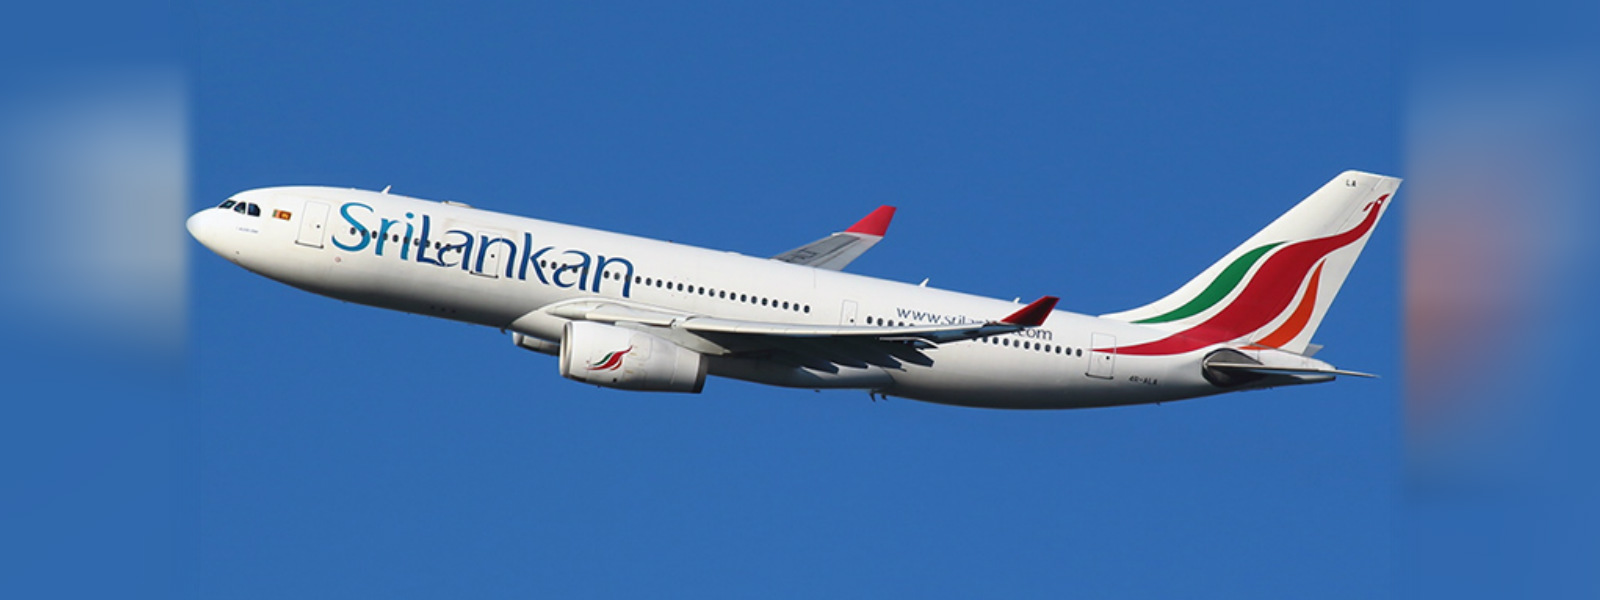 SriLankan airlines spent $90,000 in one day to follow former chairman’s orders